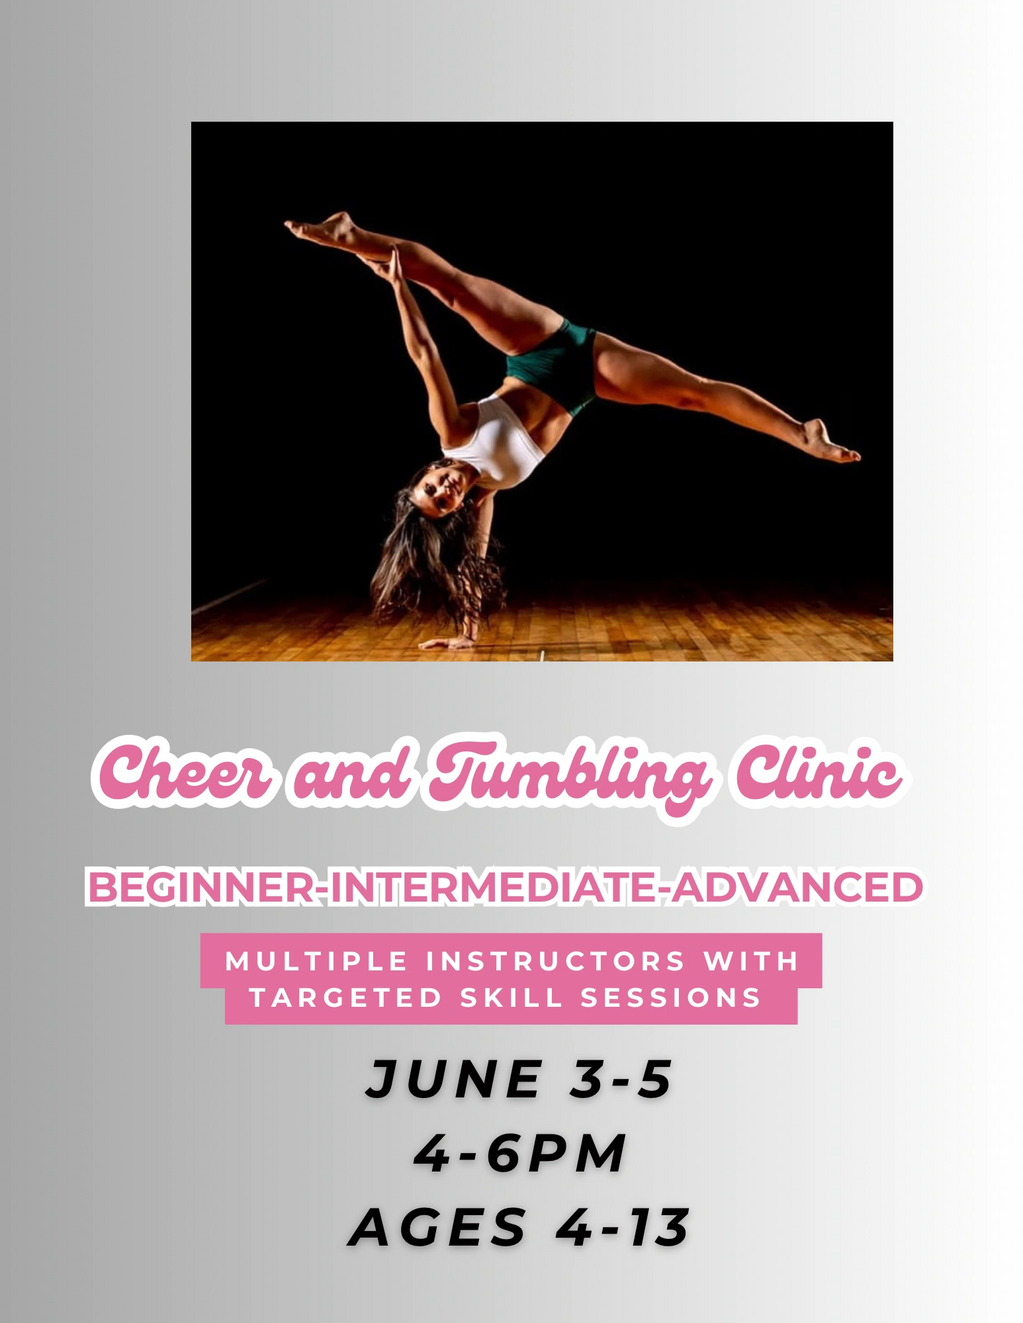 Cheer and Tumbling Clinic 